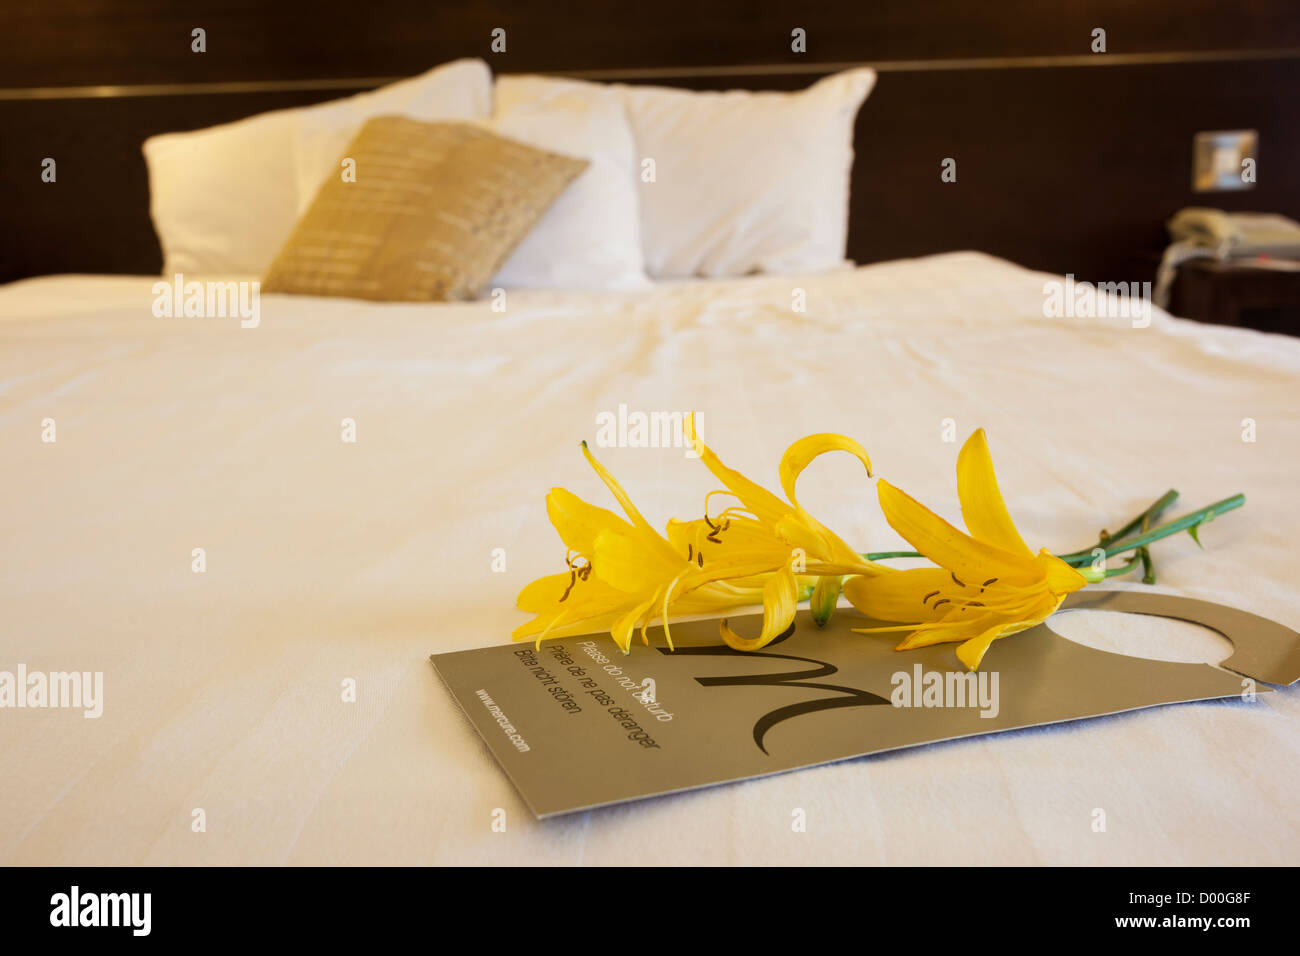 Flowers and Do Not Disturb sign lying on a hotel bed. Stock Photo